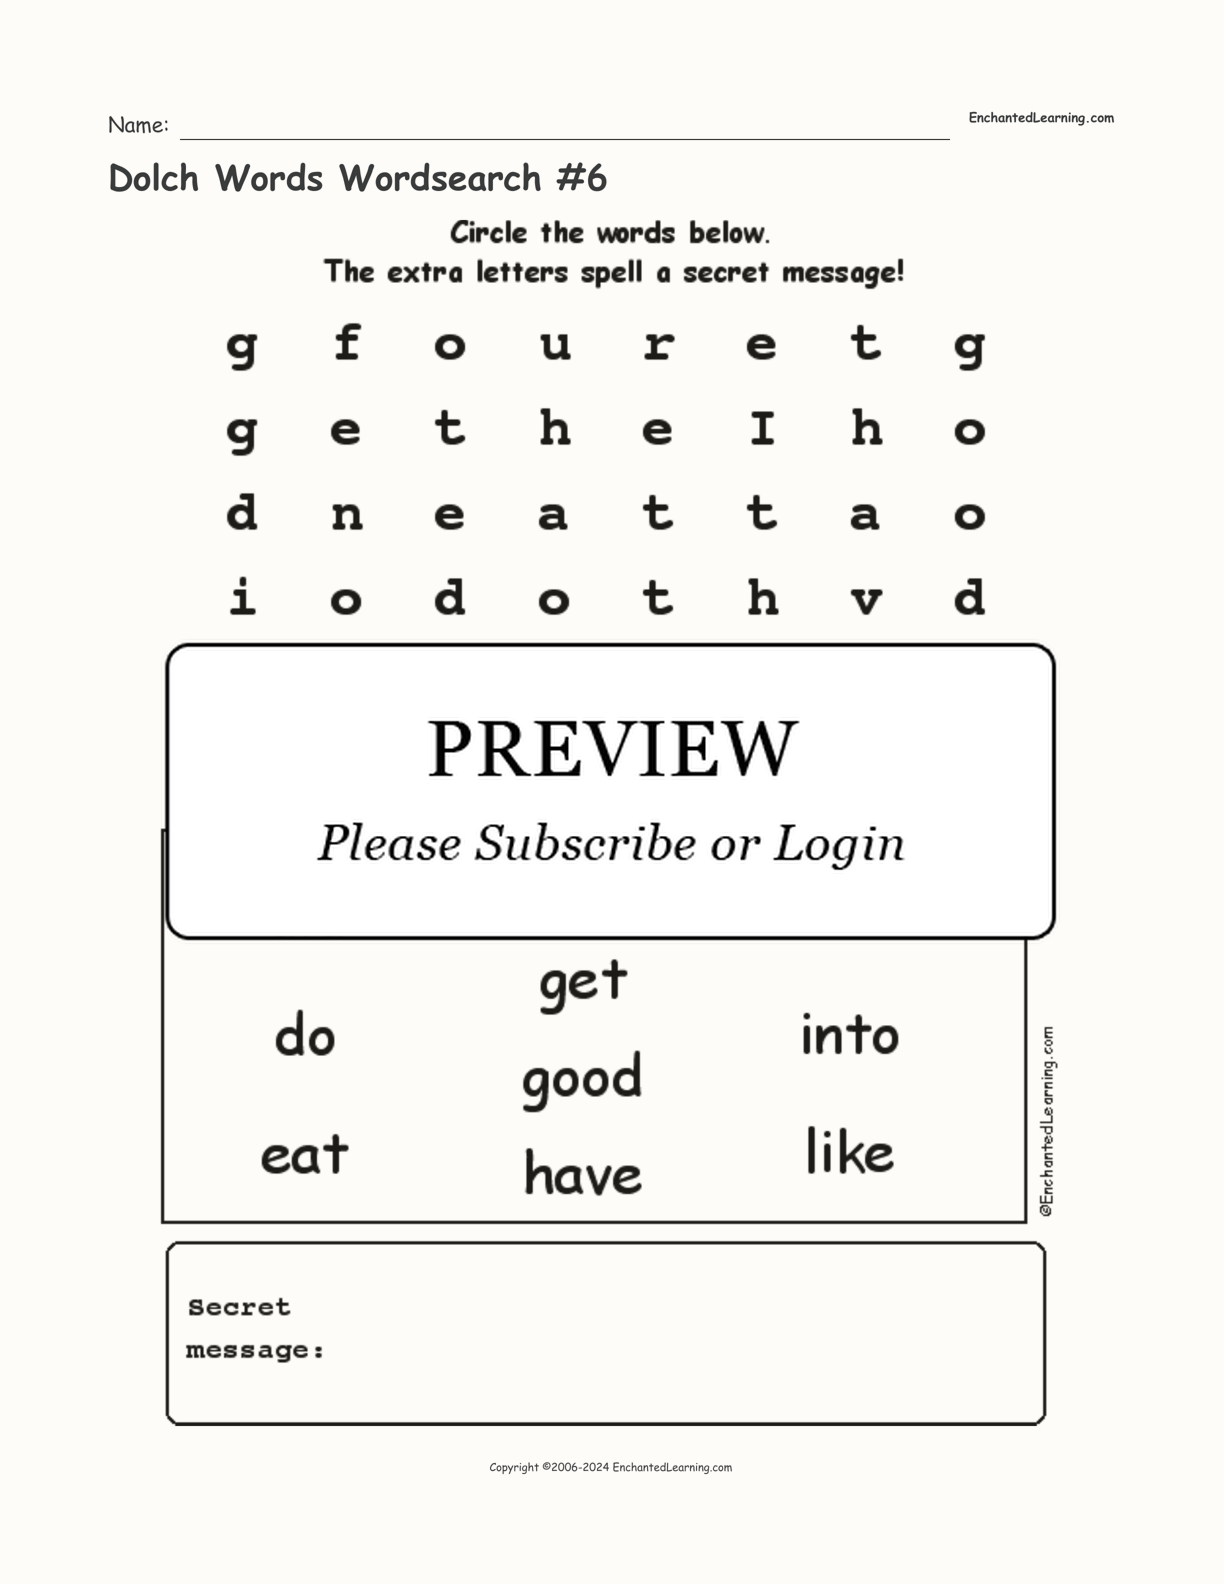 Dolch Words Wordsearch #6 interactive worksheet page 1